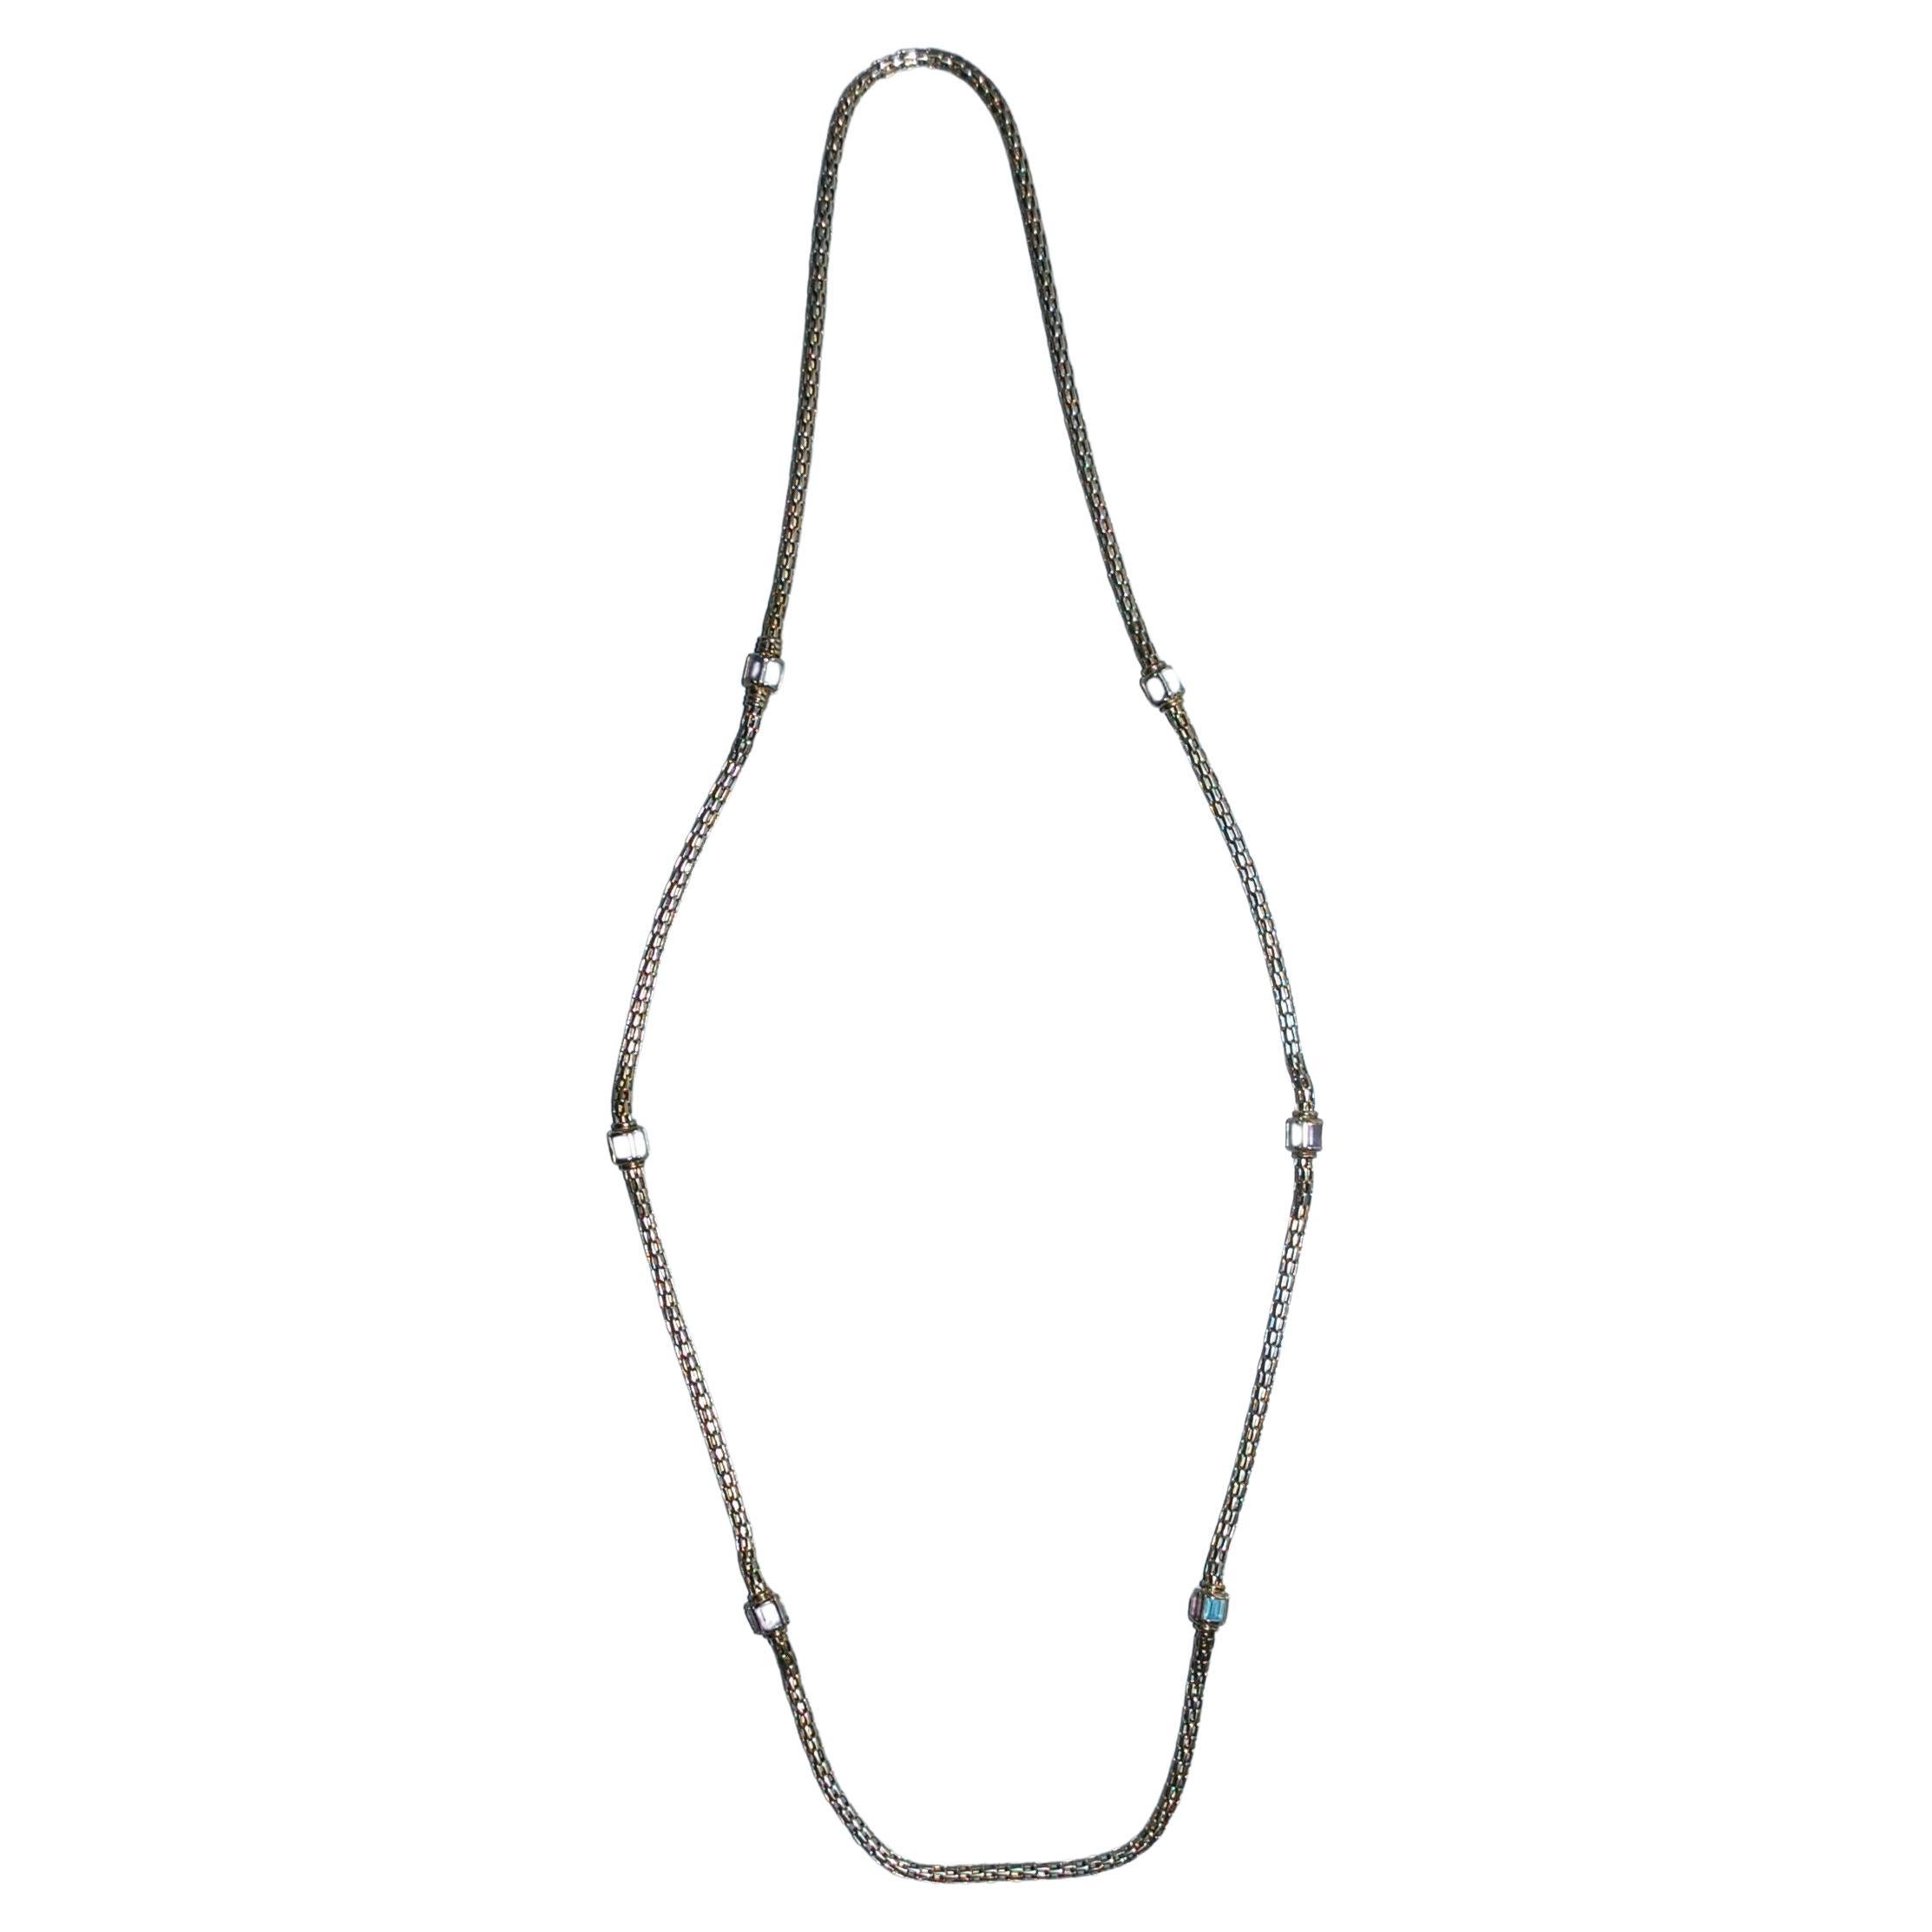 Wonderful vintage crafted of 14k yellow gold necklace, about 36 inch long has the look of a mesh chain, but is actually made up of sturdy tiled lengths that give the necklace lots of fluidity and movement.  Accented with aquamarine and amethyst